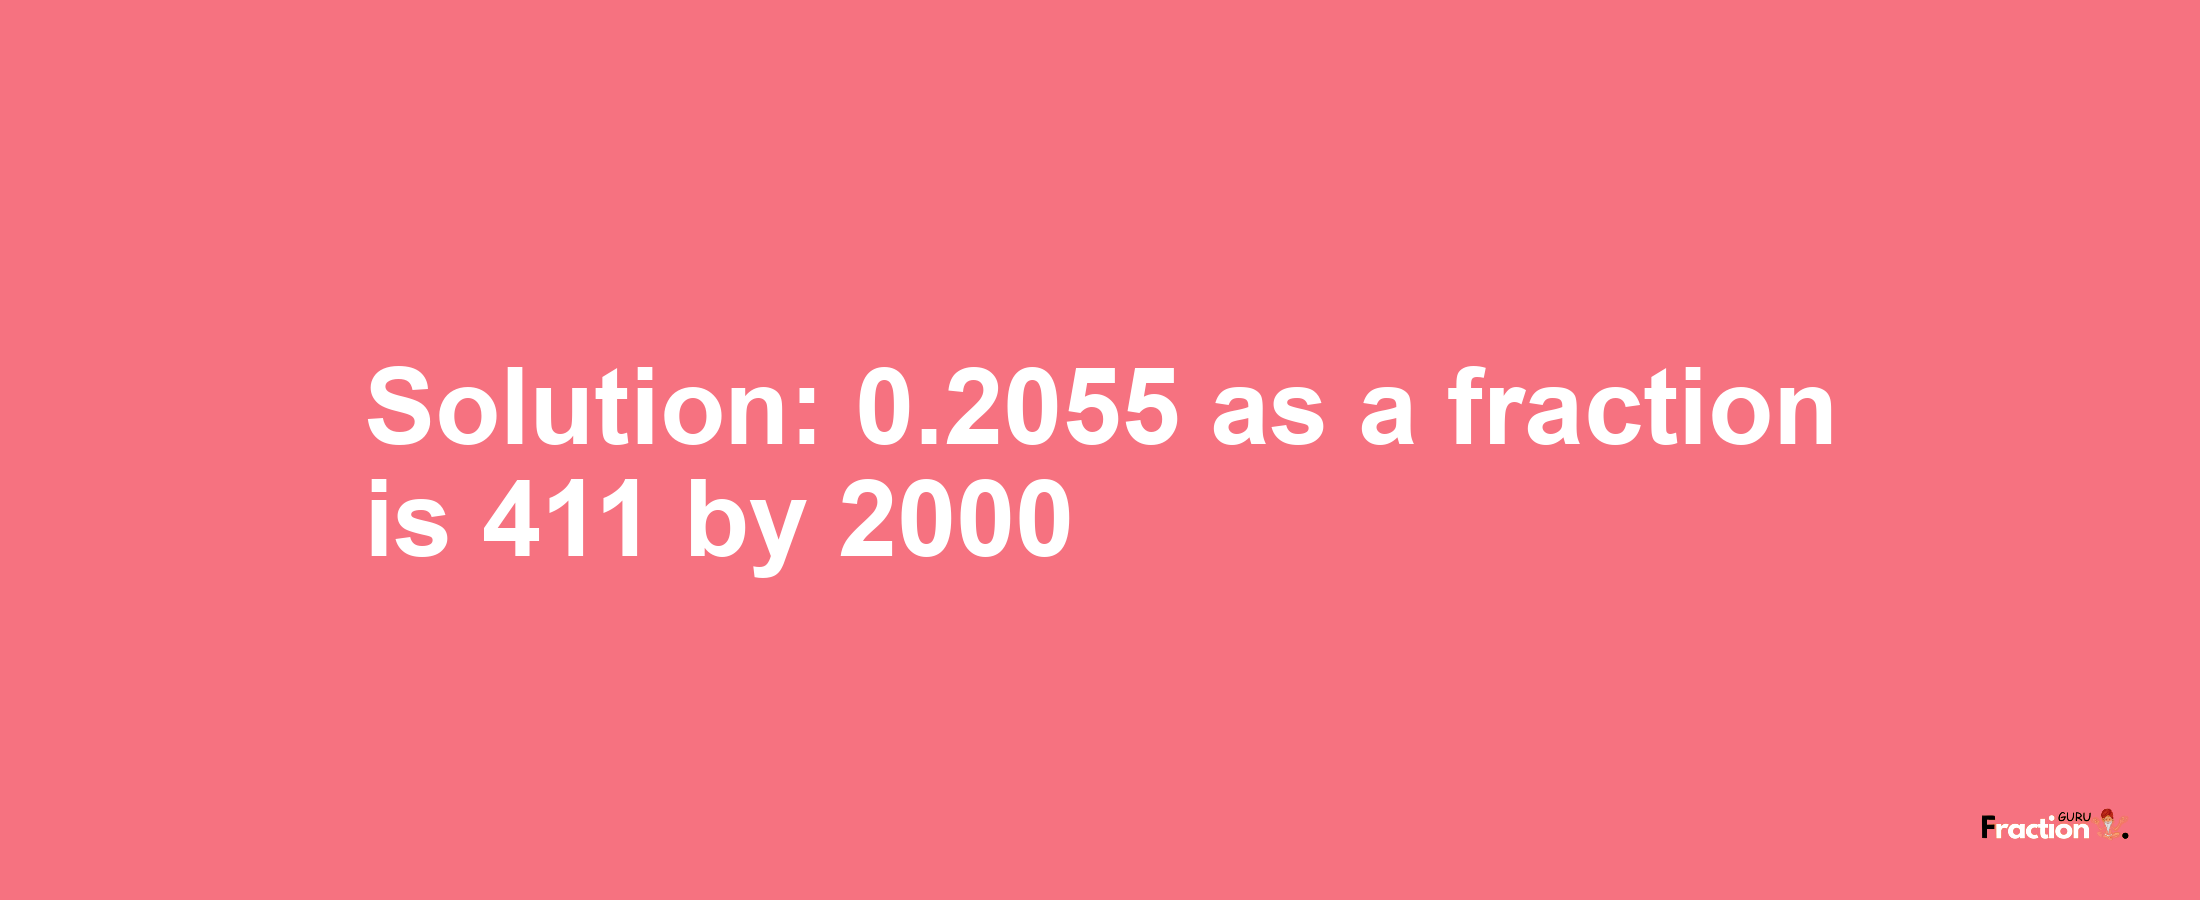 Solution:0.2055 as a fraction is 411/2000